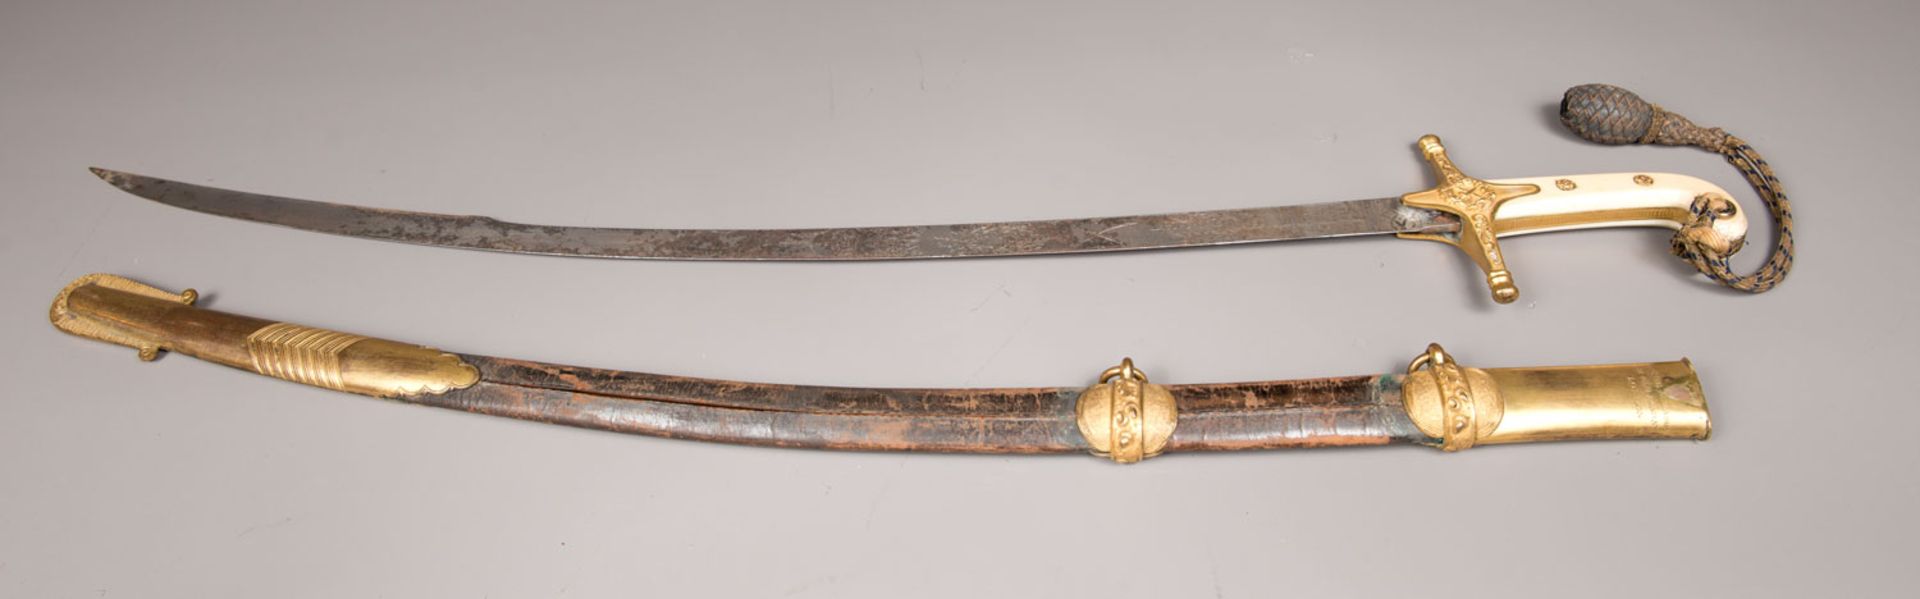 A Binnie and Mason officer sword - Image 2 of 4